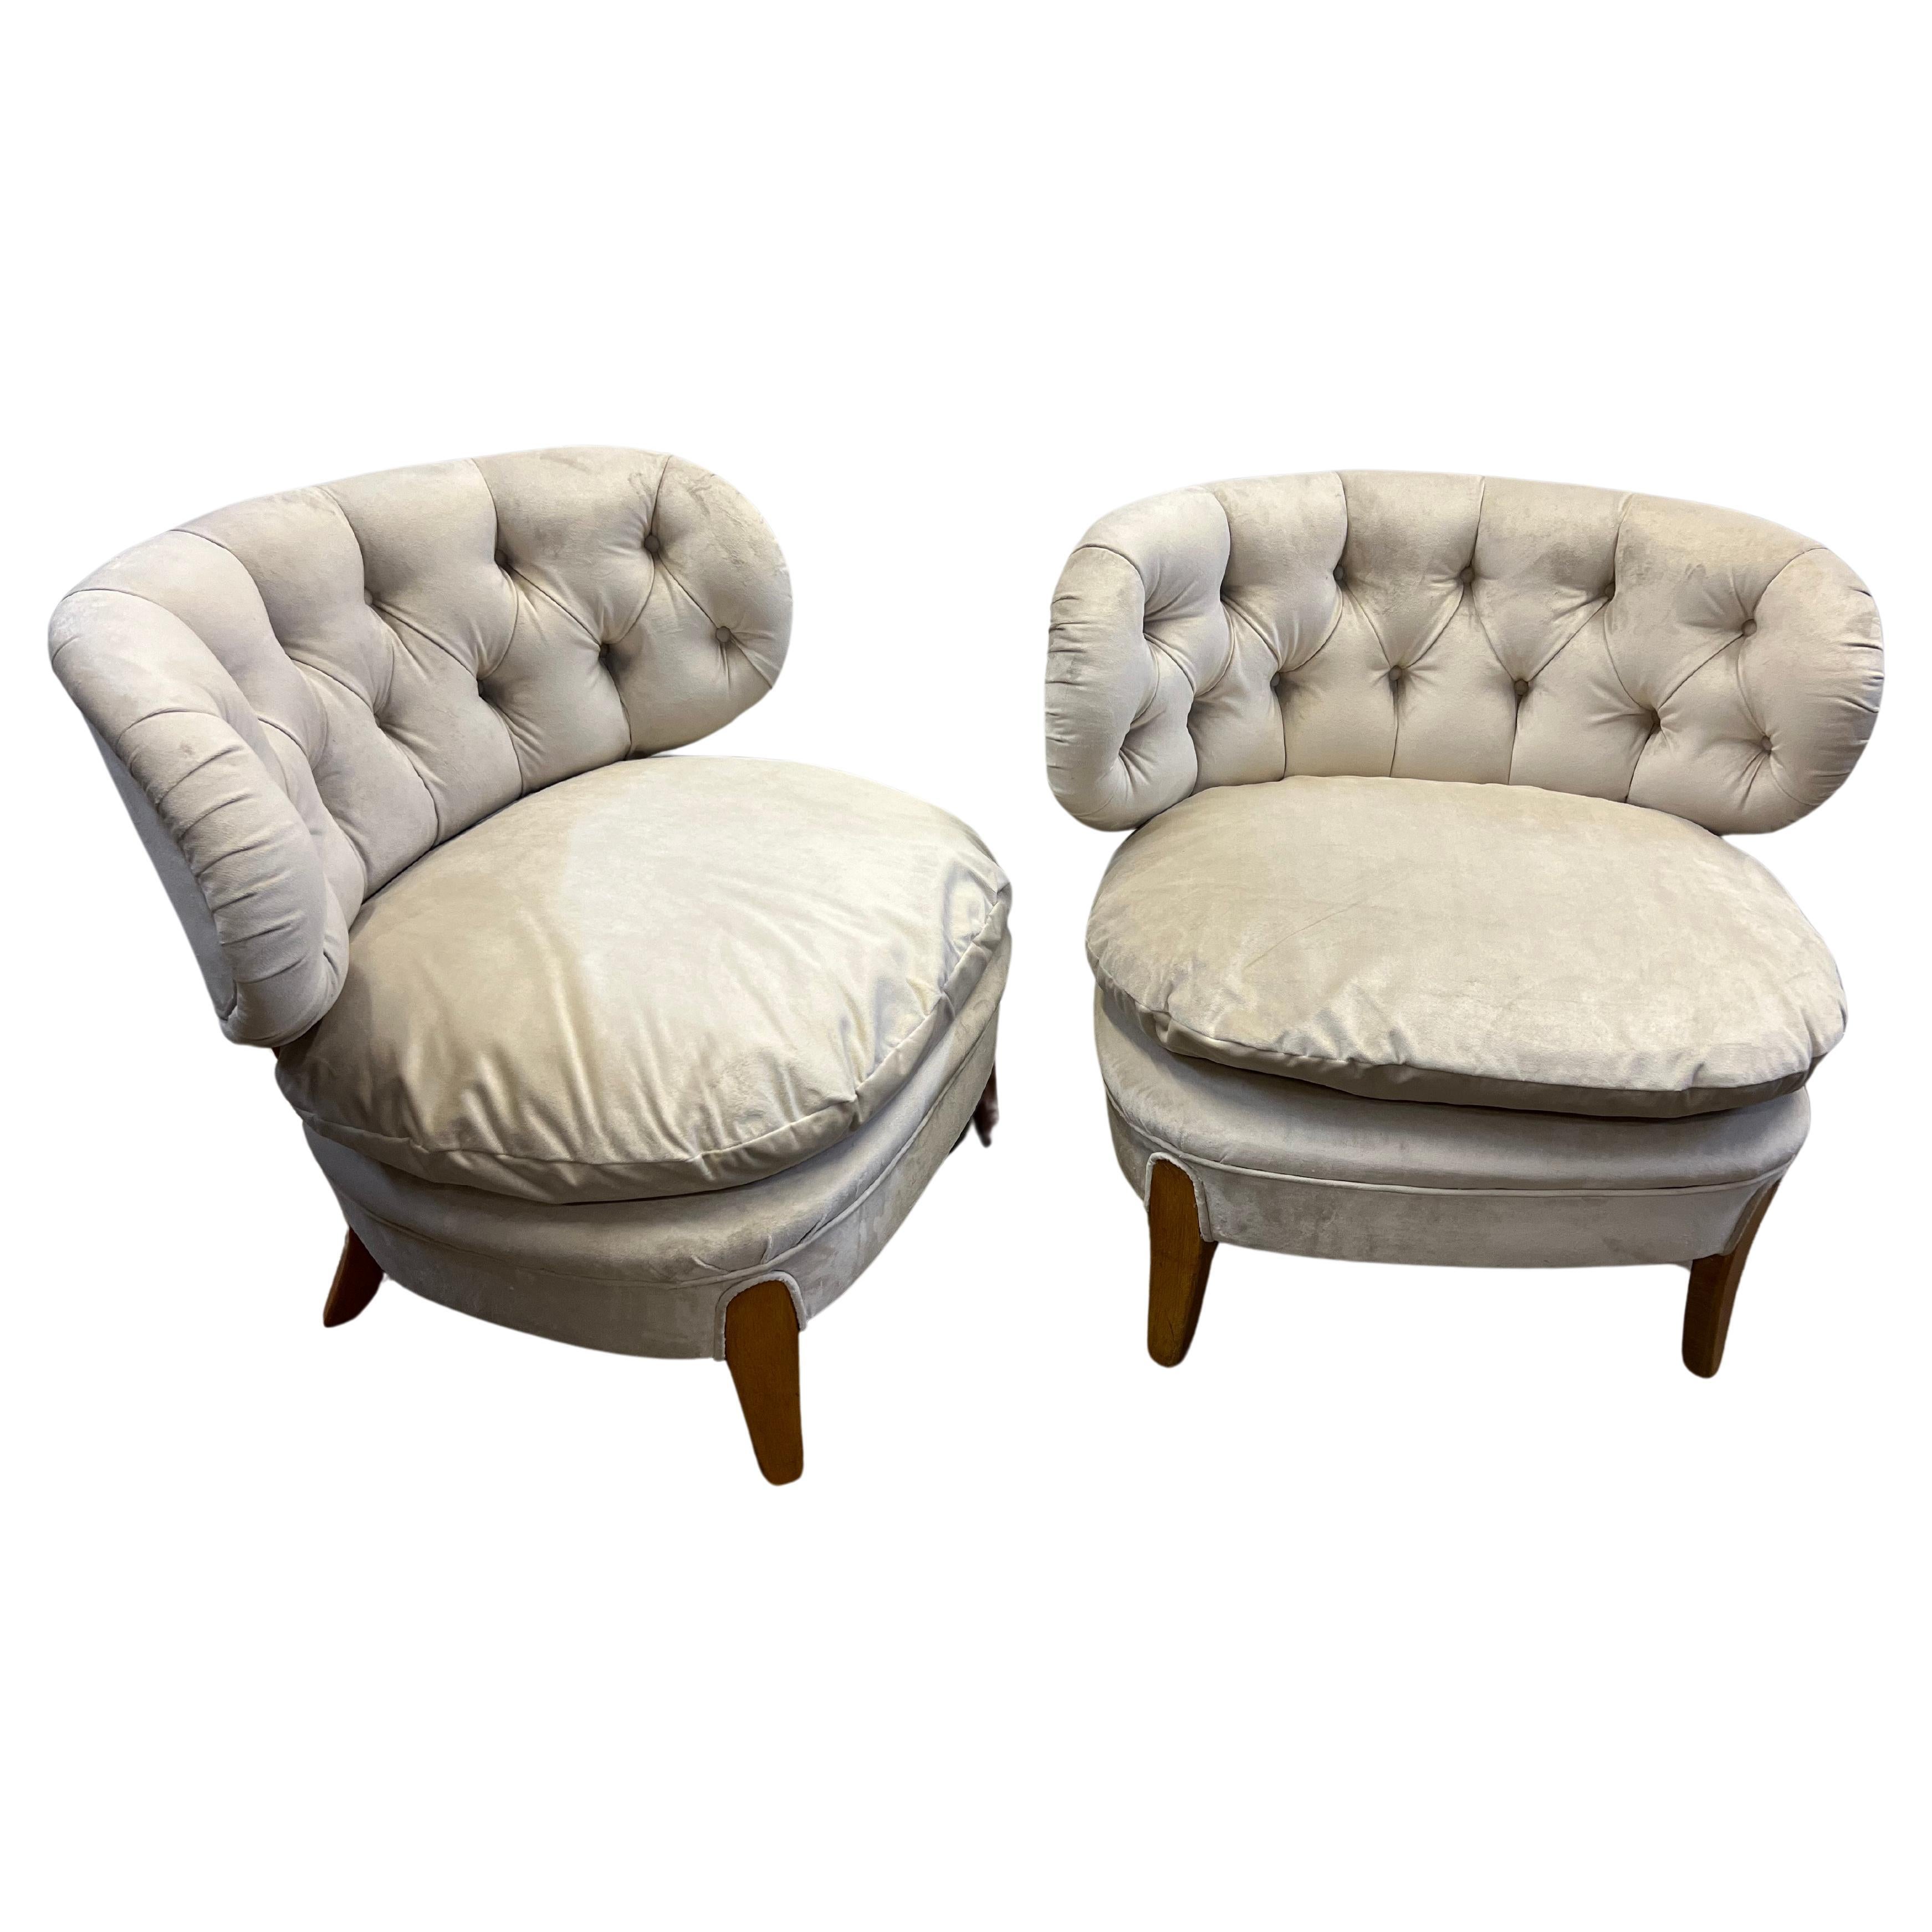 Pair of Otto Schultz Newly Upholstered Velvet Chairs, circa 1940s For Sale